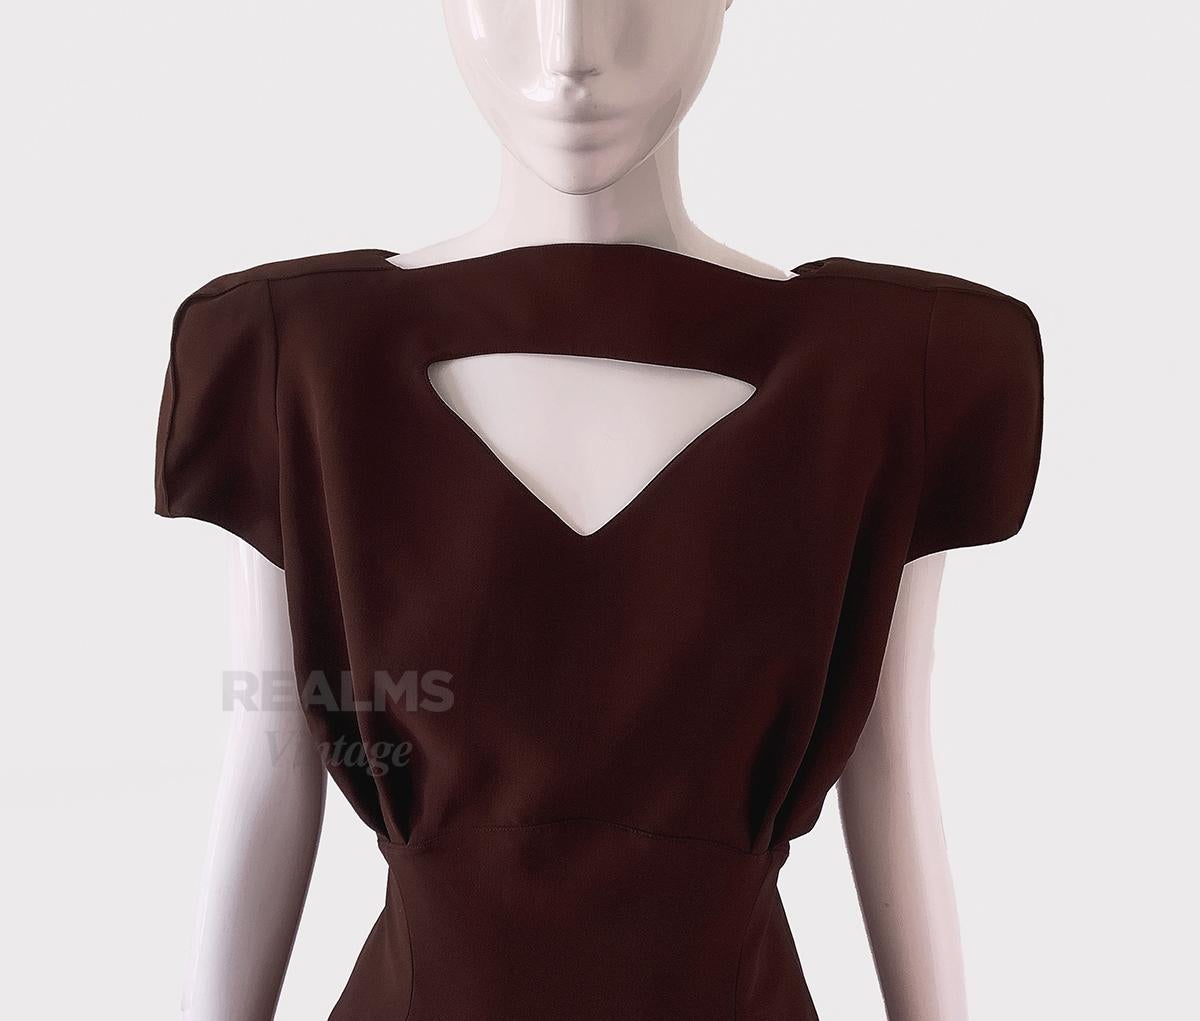 Iconic and Extremely Rare Thierry Mugler Dress SS 1988 Sculptural  For Sale 1